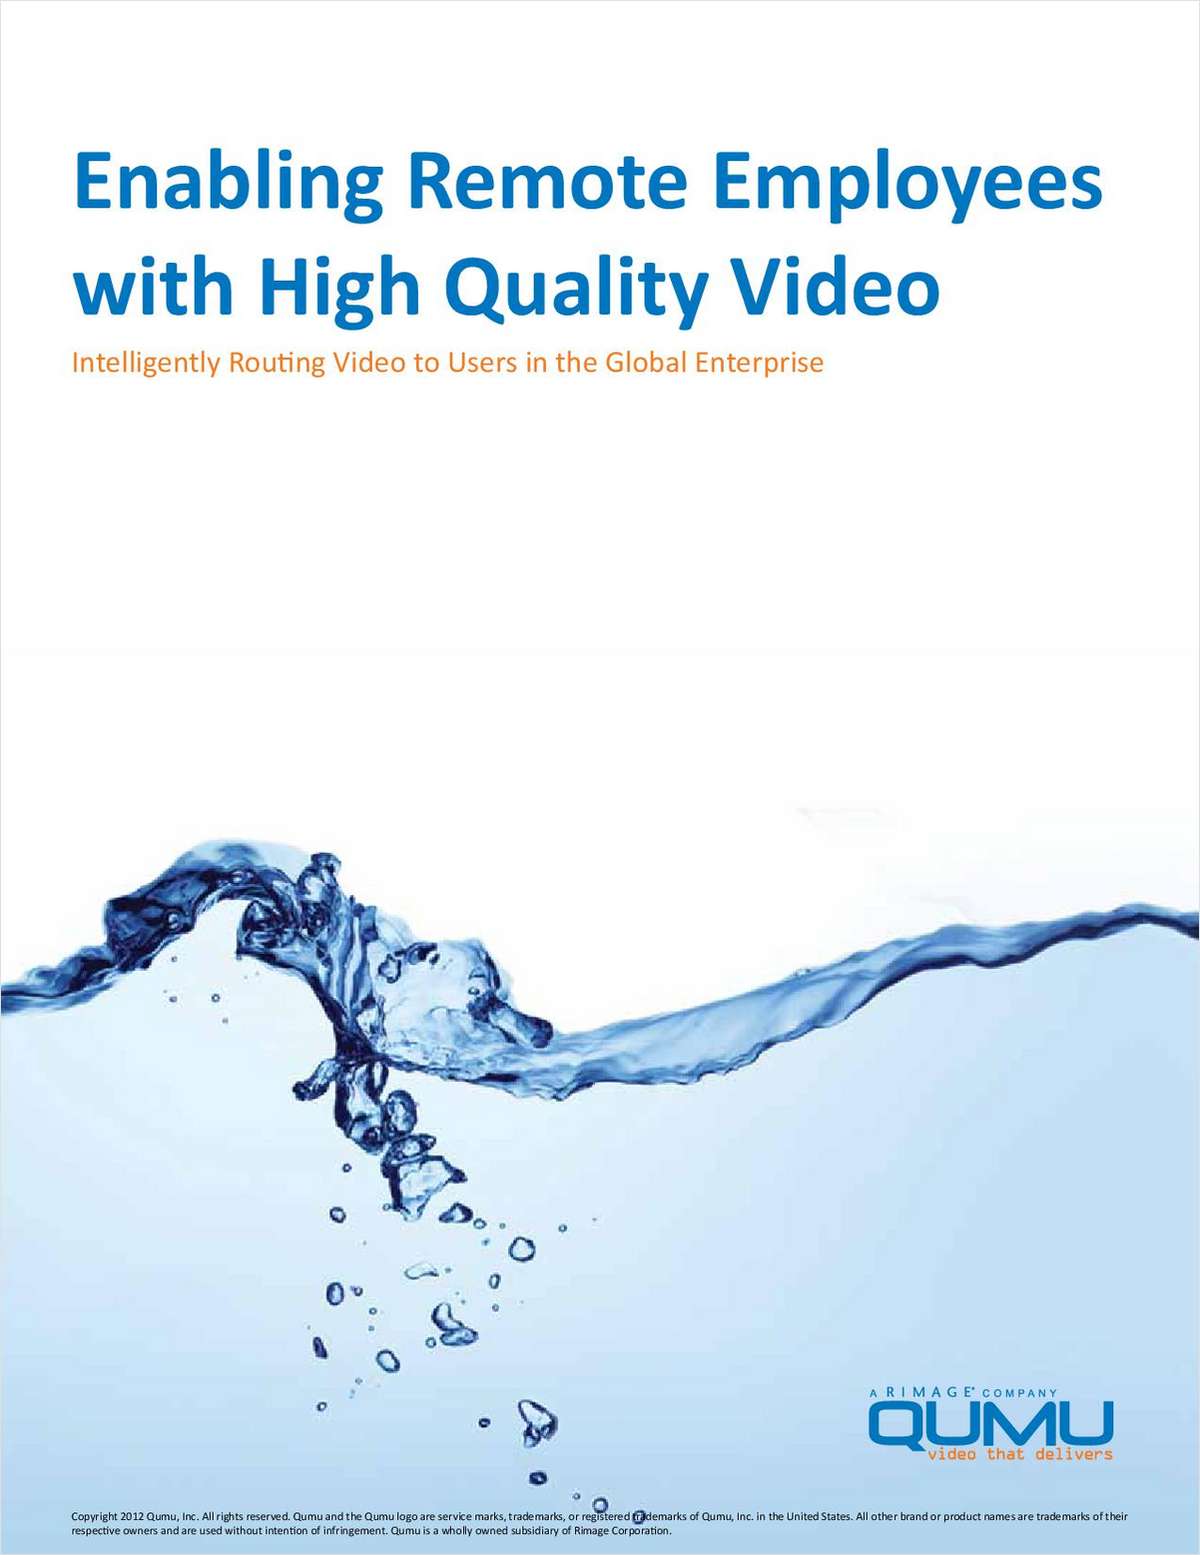 Enable Global Remote Employees with High Quality Video by Intelligently Routing Video to the User